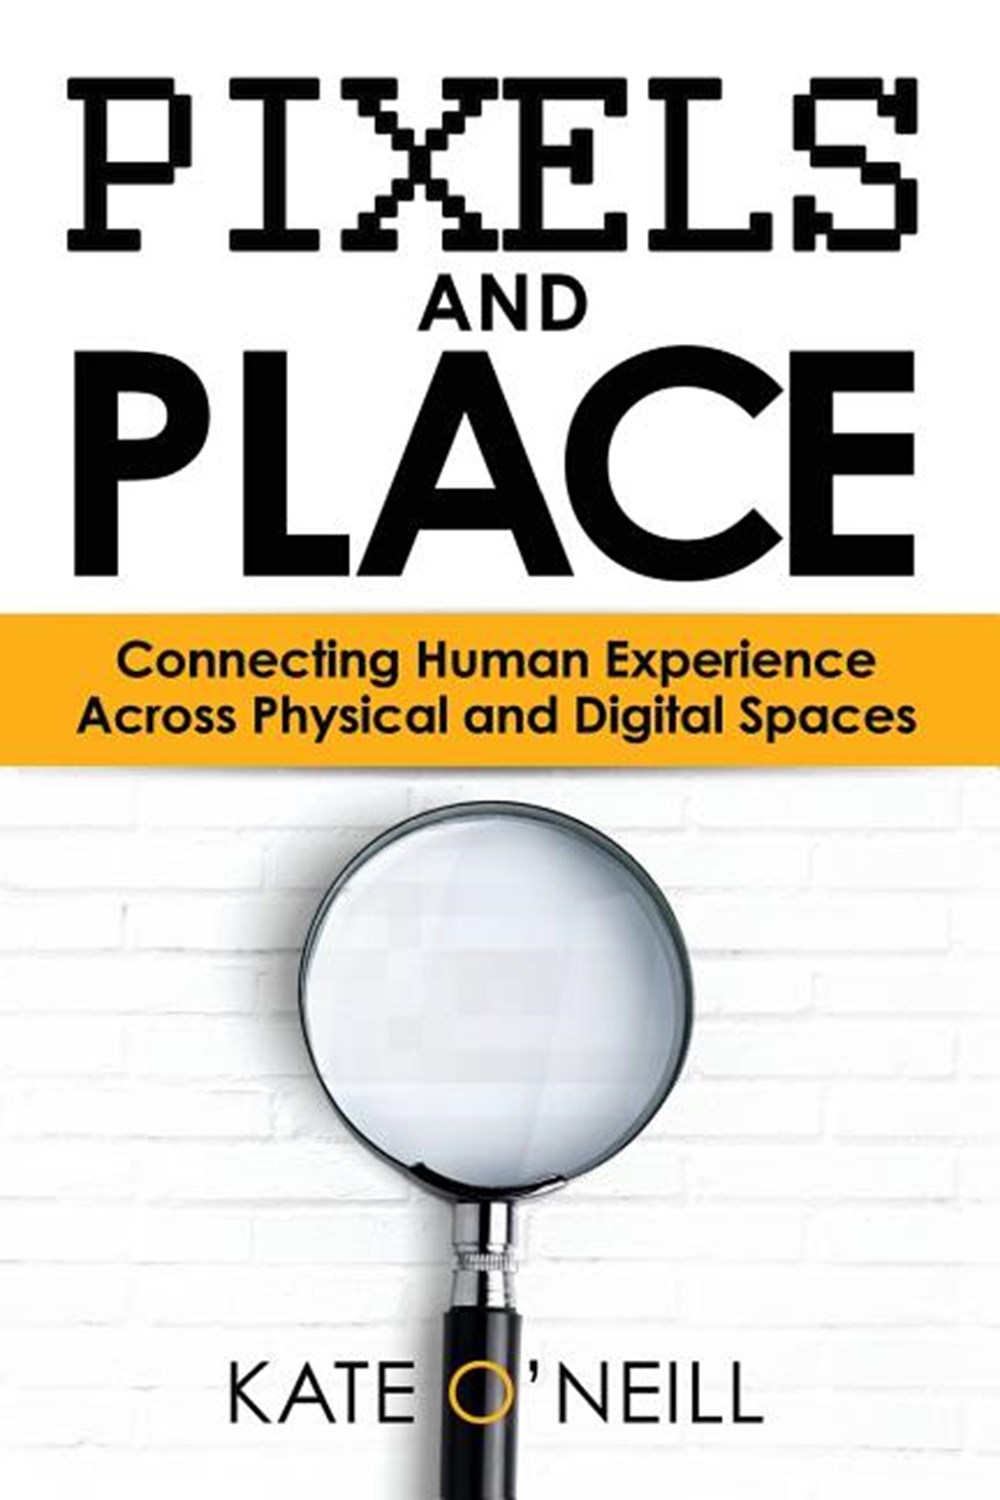 Pixels and Place: Designing Human Experience Across Physical and Digital Spaces